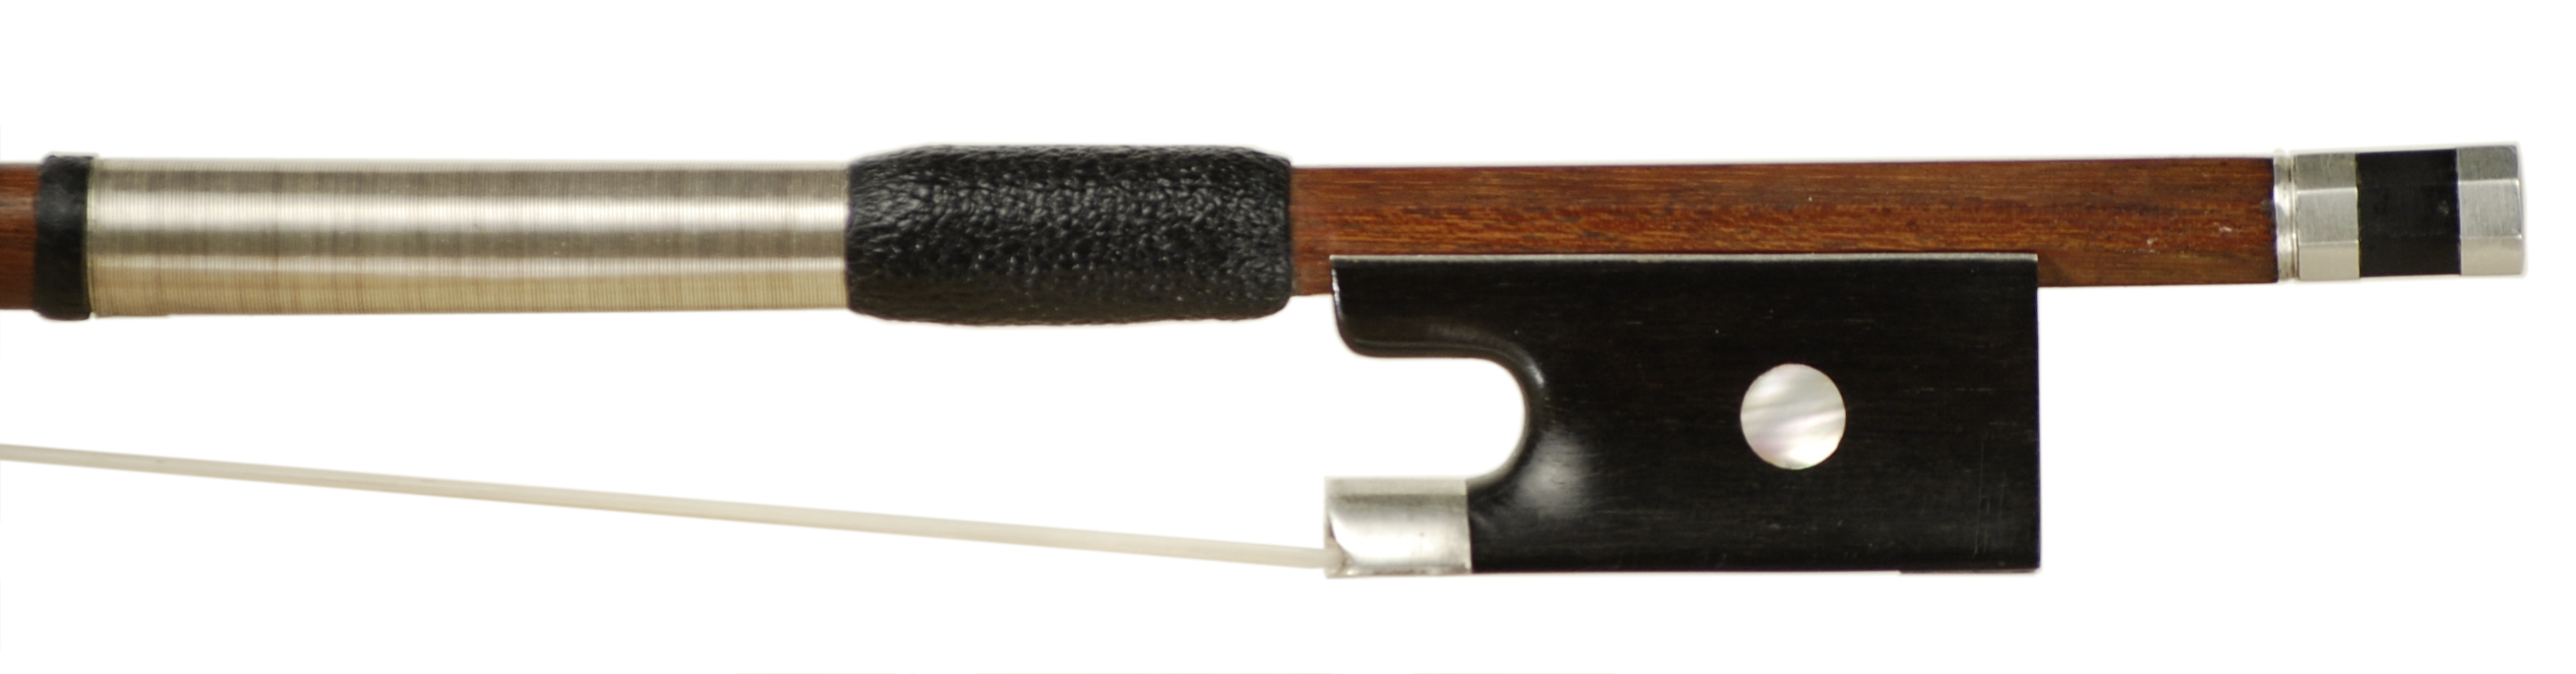 German Non-Branded Early 20th Century Violin Bow | Judd Violins